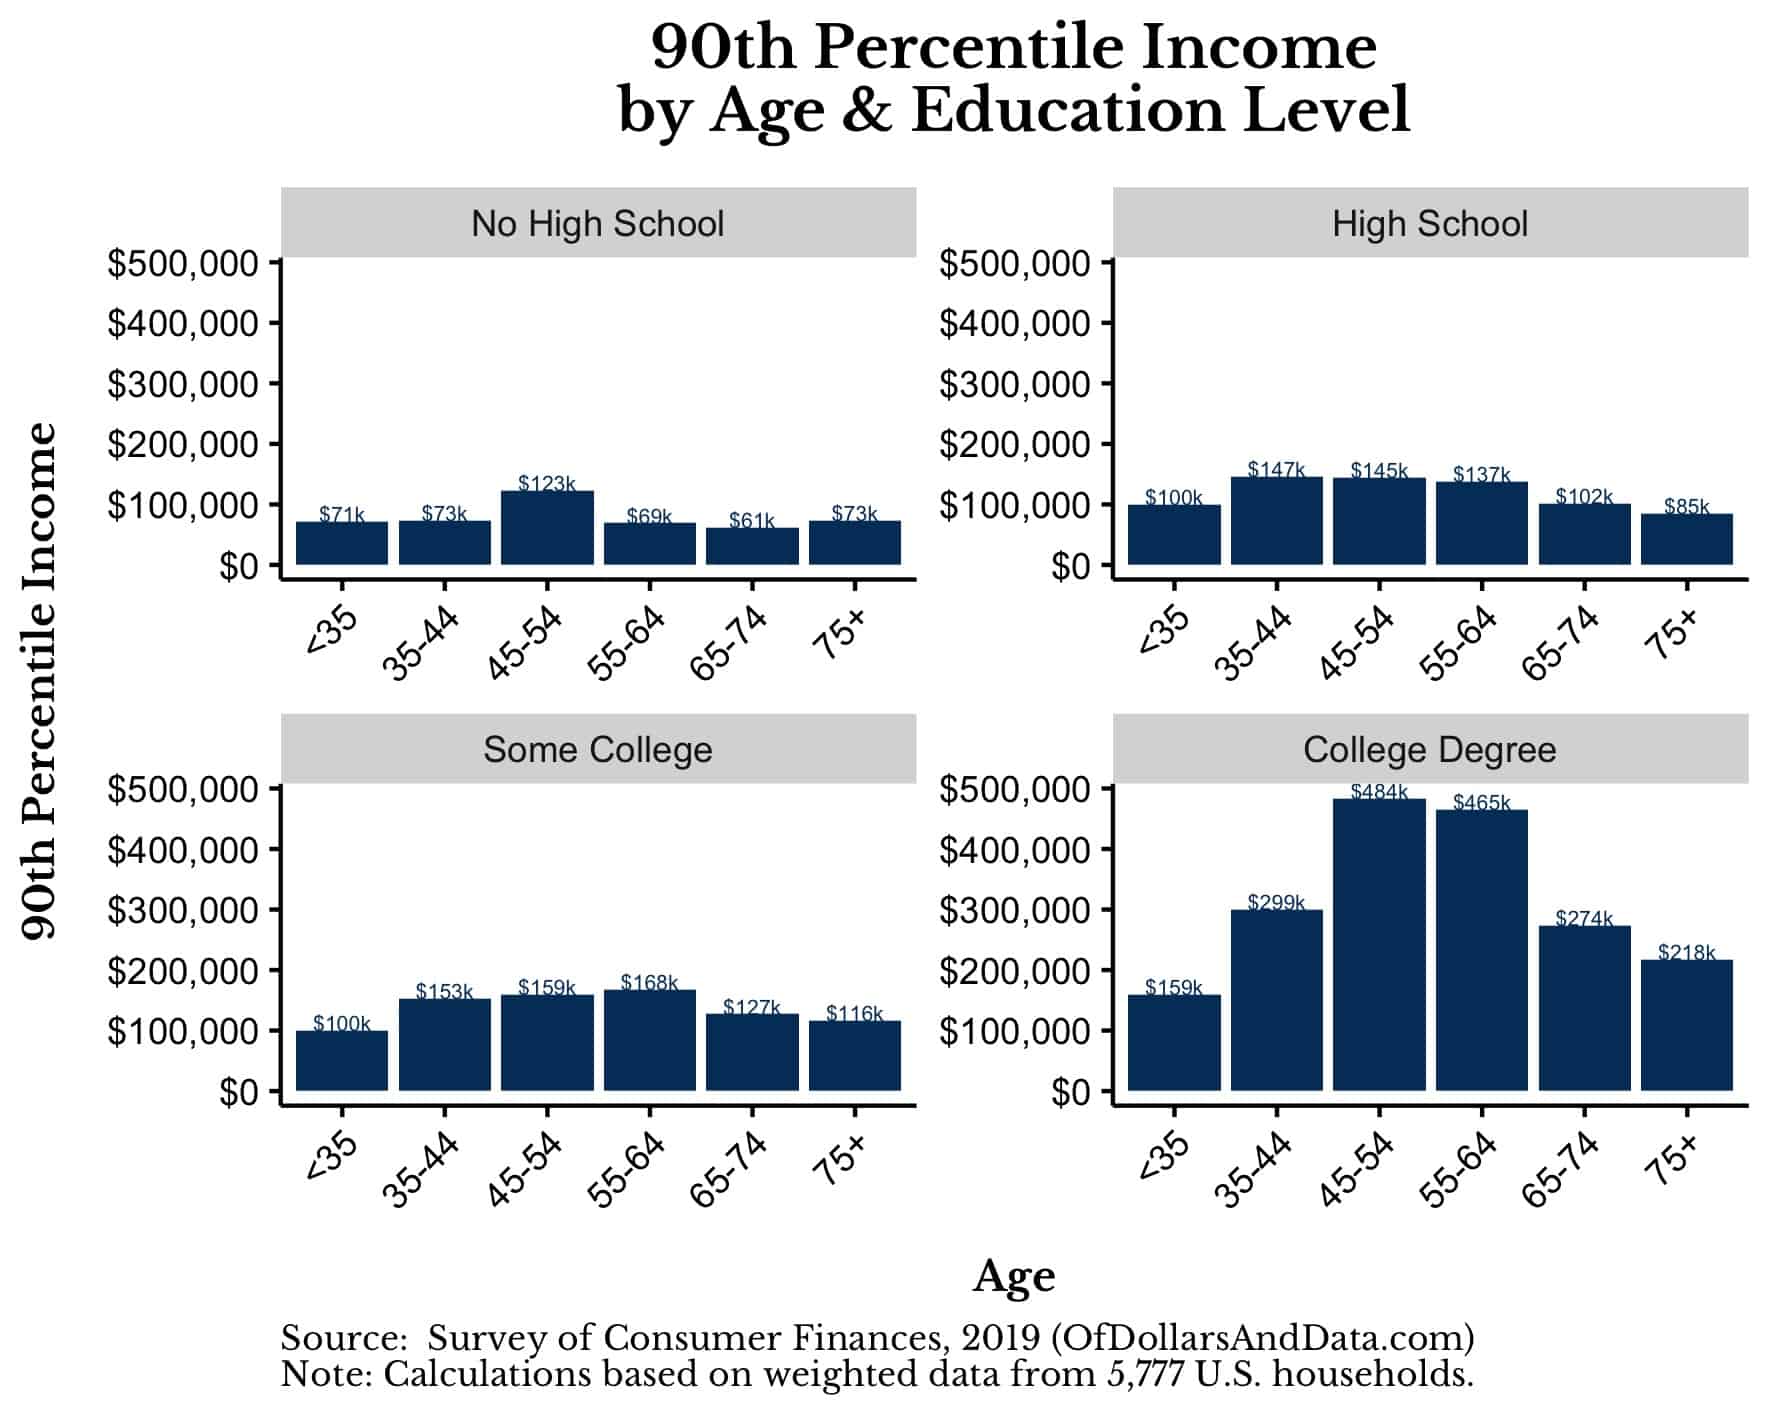 90th percentile household income broken out by age and education level.